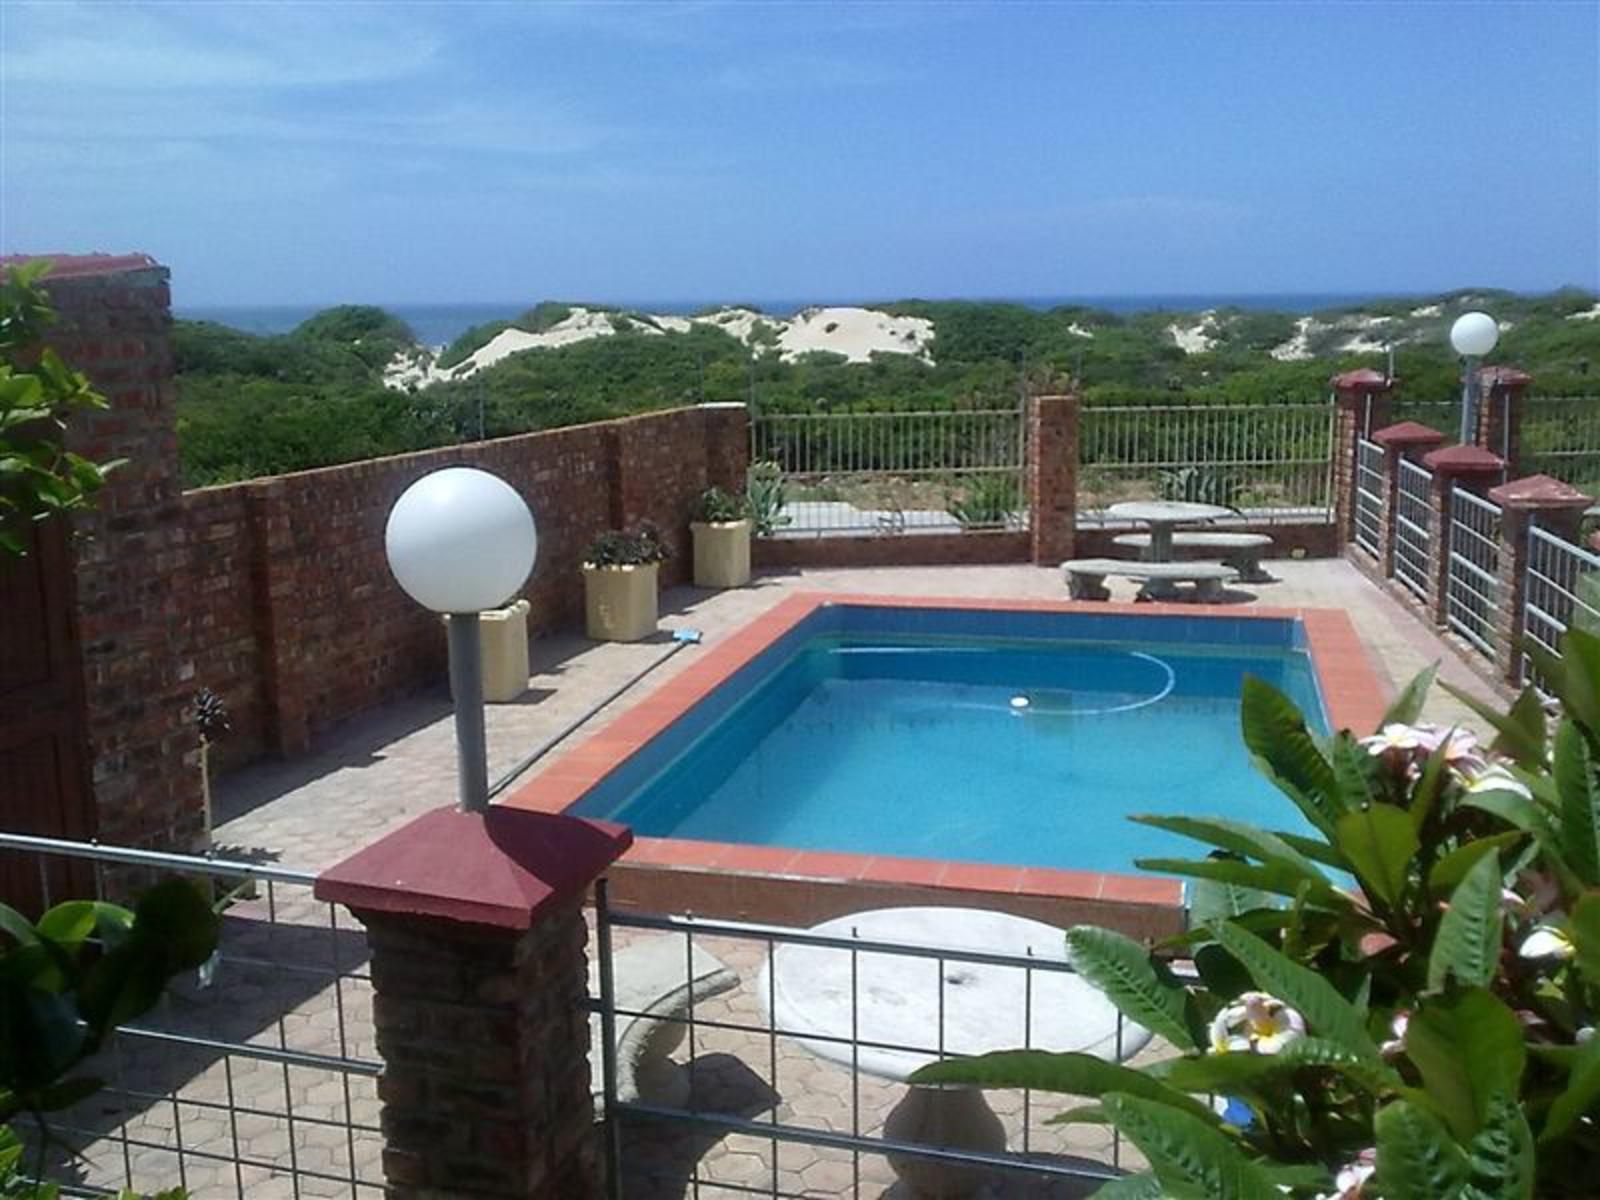 Whales Way Lodge Bluewater Bay Port Elizabeth Eastern Cape South Africa Beach, Nature, Sand, Palm Tree, Plant, Wood, Swimming Pool